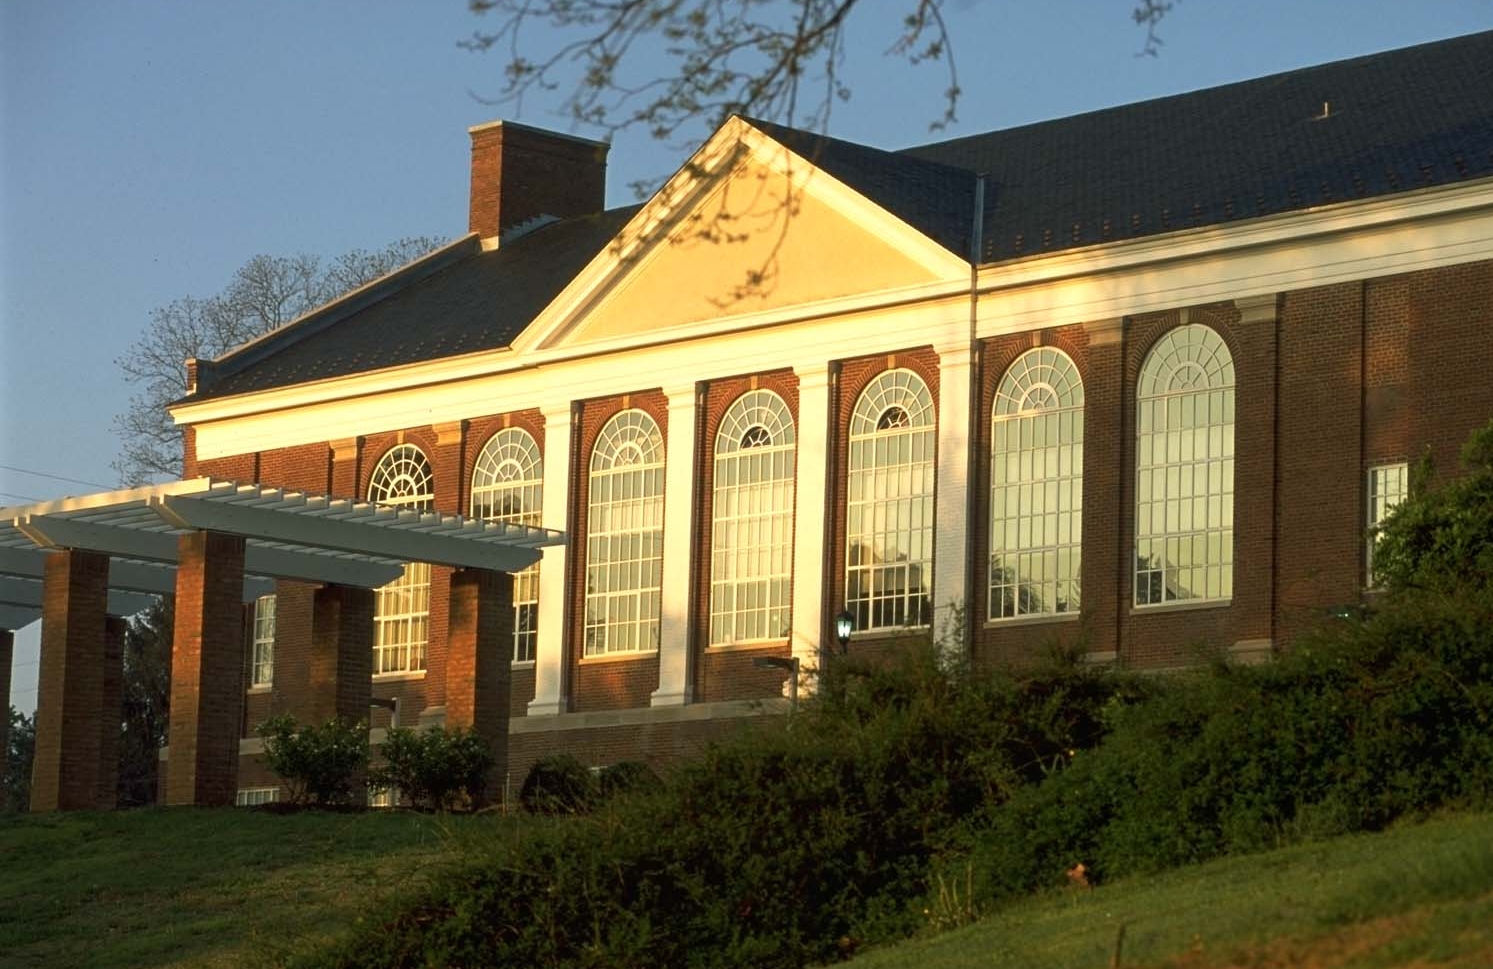 A historic brick building with white columns surrounded by grass.